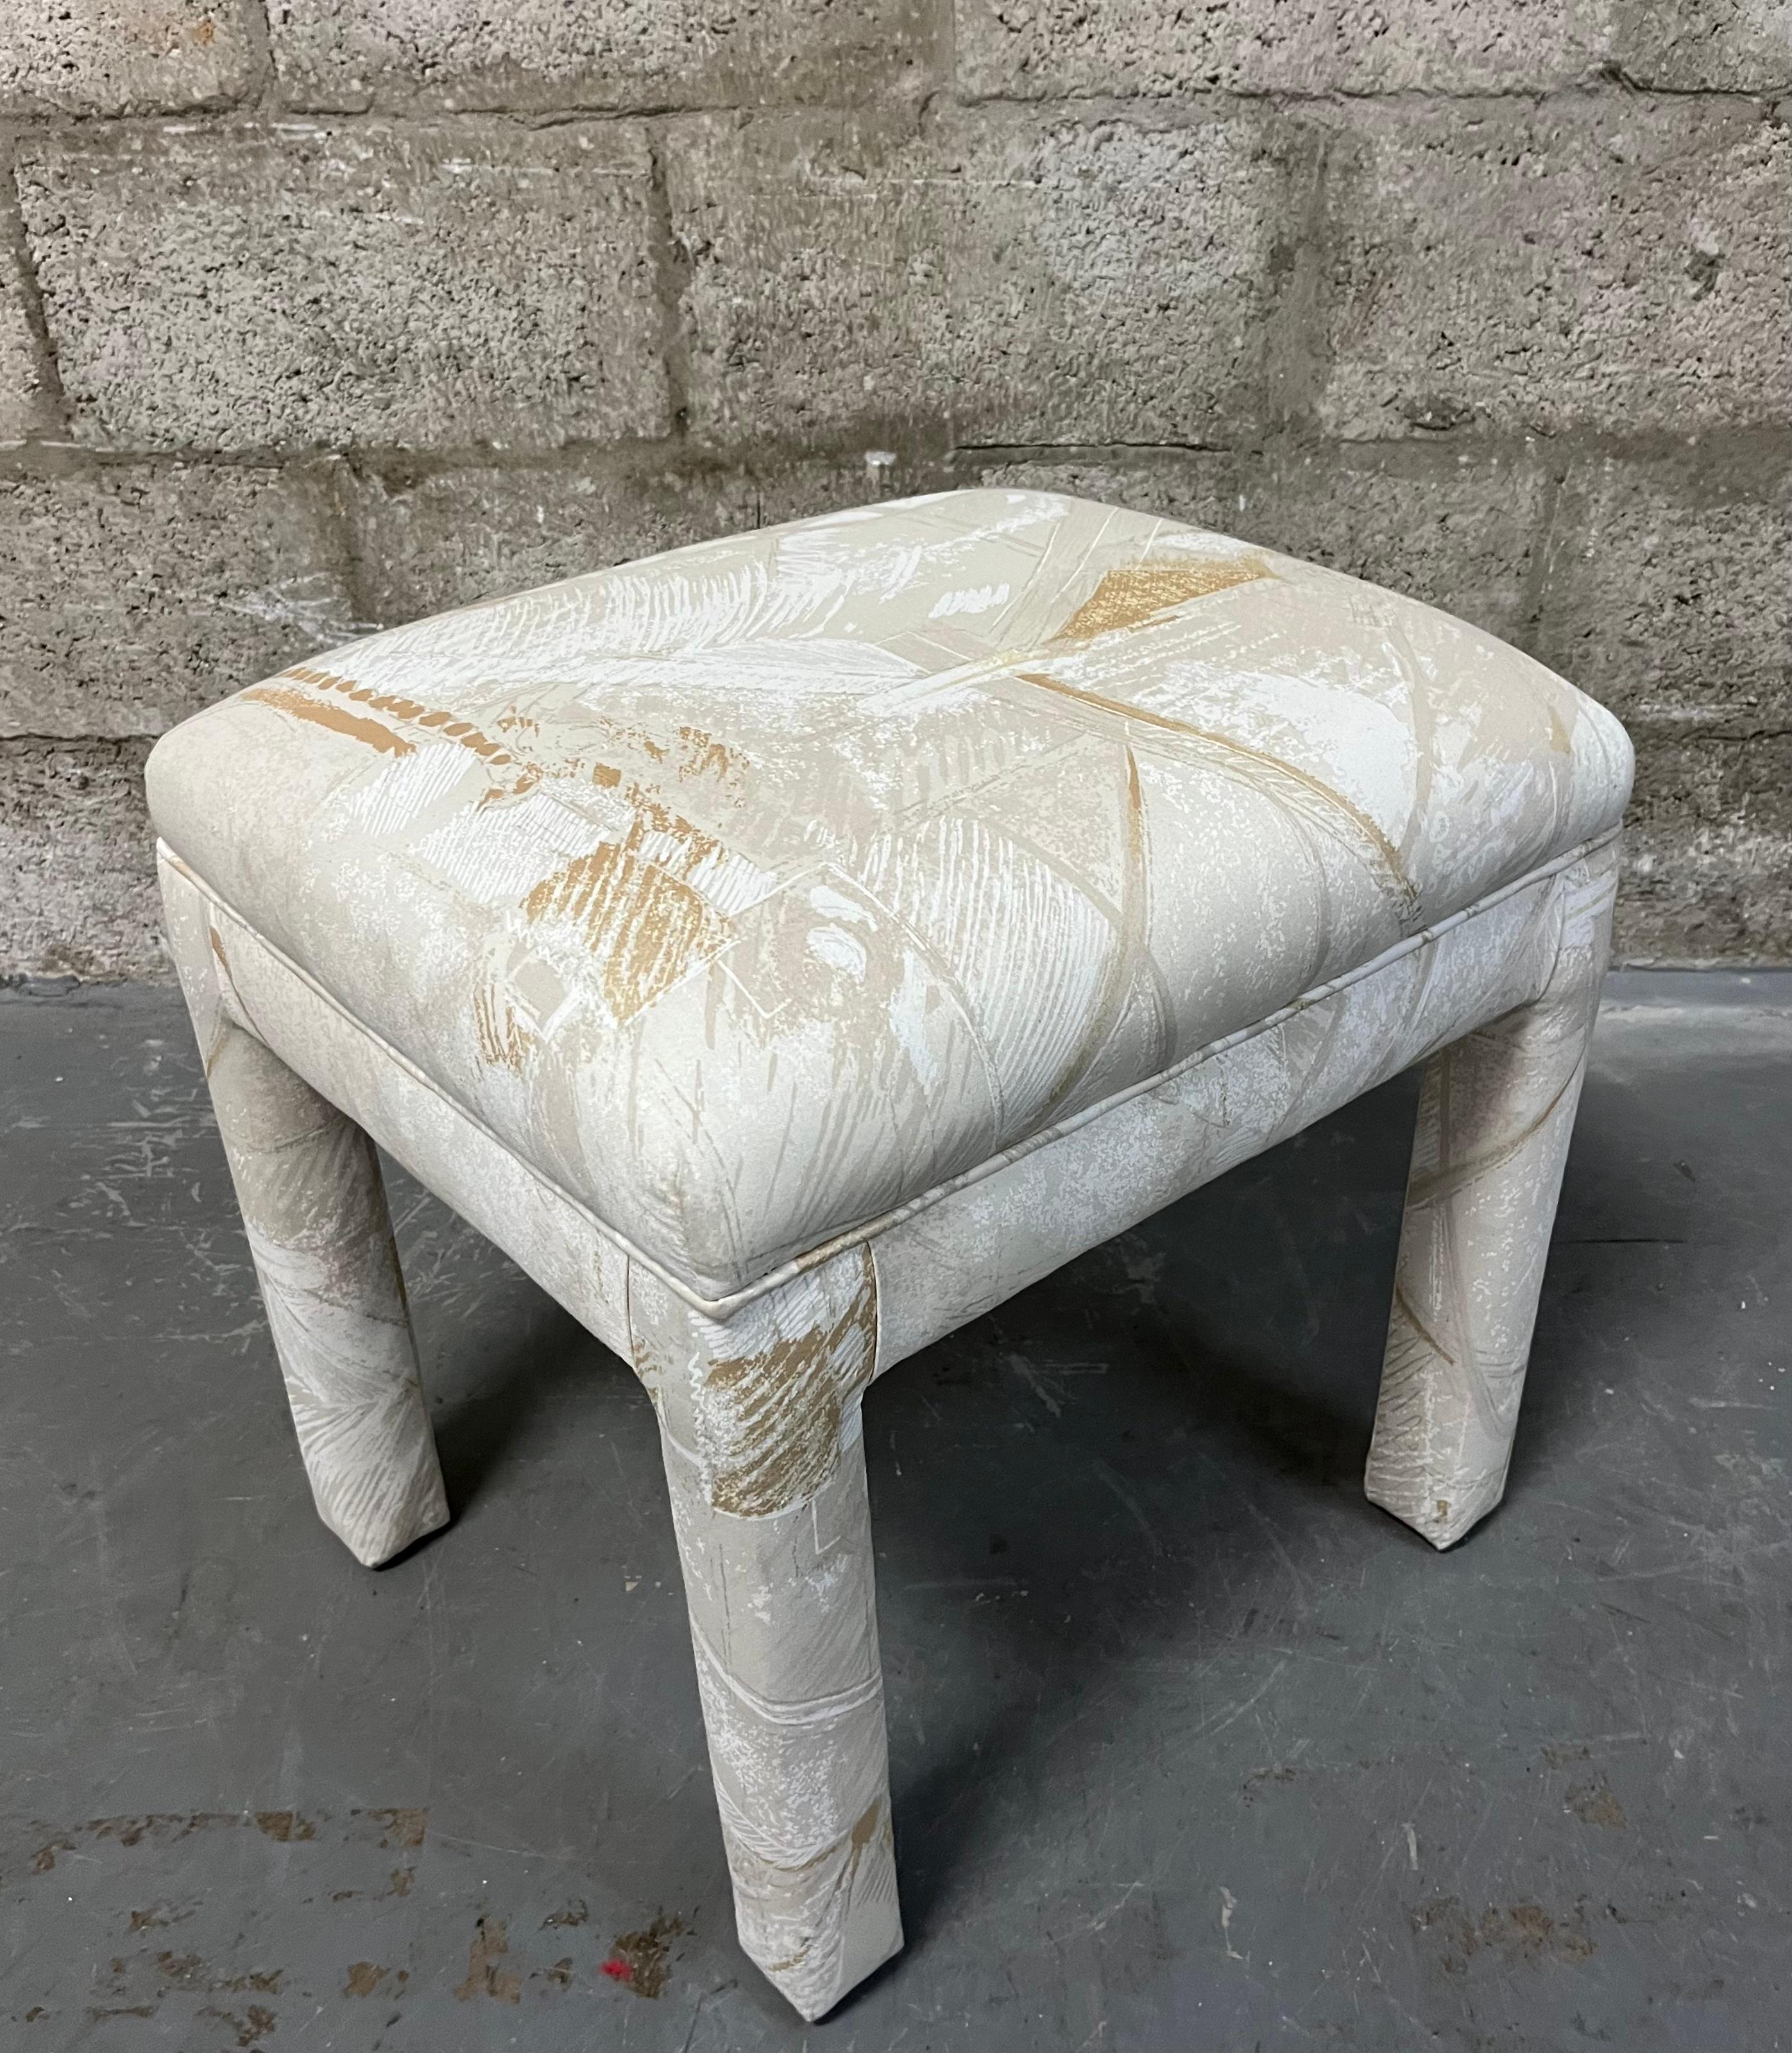 Vintage Fully Upholstered Postmodern Parson Style Vanity Bench Stool. Circa 1980s
Features a completely upholstered body with a fabric with beige, antique gold, and tan abstract print on a solid soft cream background. 
With near mint original